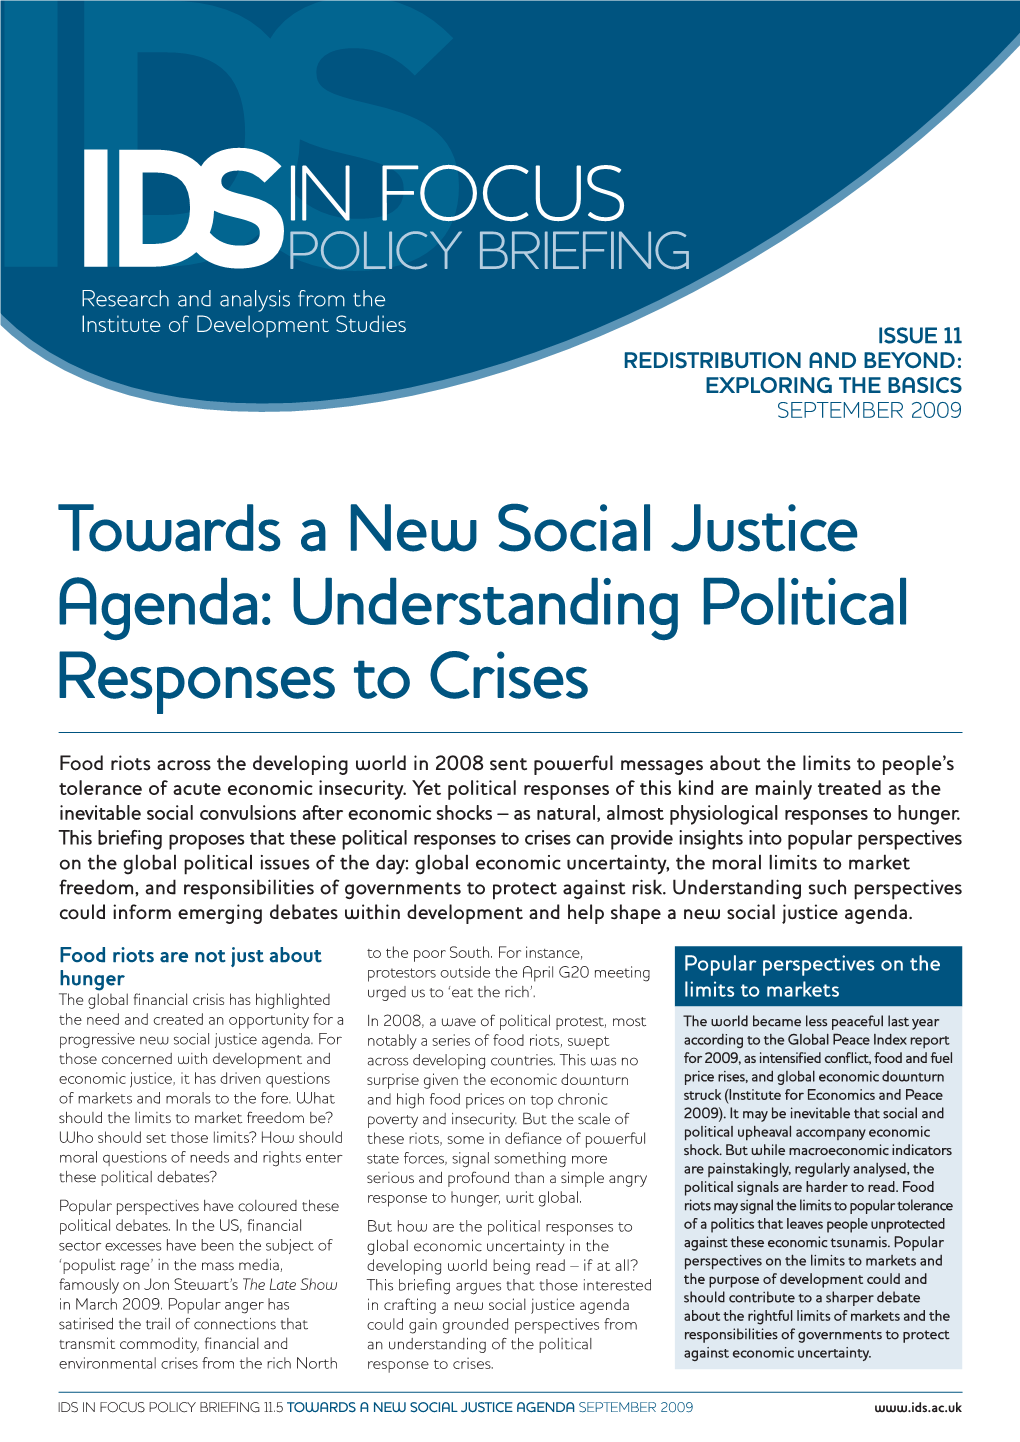 IN FOCUS POLICY BRIEFING Research and Analysis from the Institute of Development Studies ISSUE 11 Redistribution and Beyond: Exploring the Basics SEPTEMBER 2009